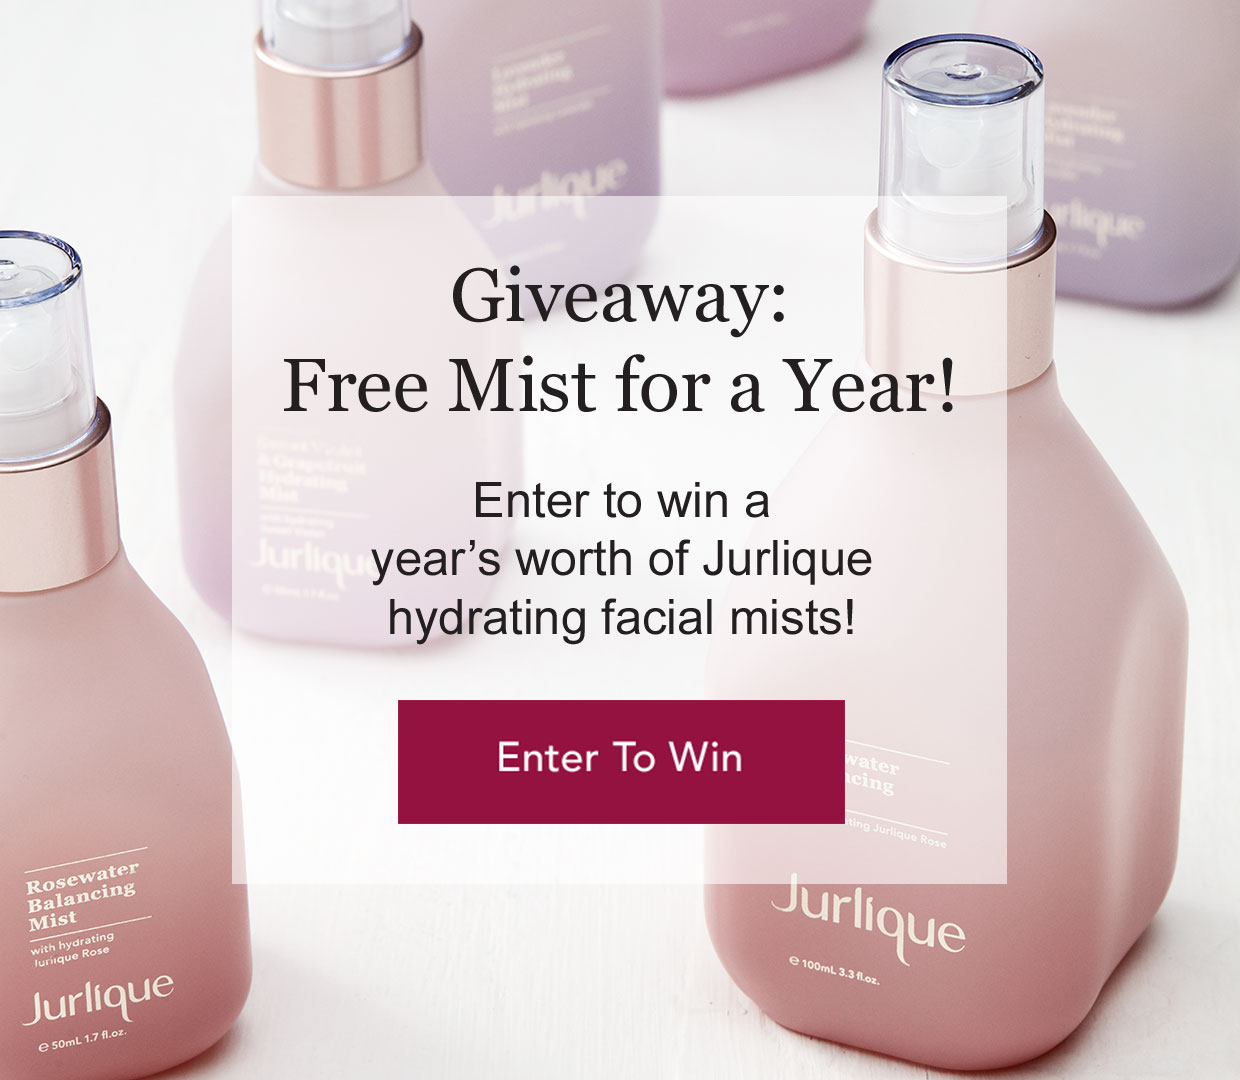 10 lucky winners will score a year's worth of Jurlique hydrating facial mists! Each winner receives the following: (NEW) 2 Rosewater Balancing Mist 100mL, (NEW) 2 Sweet Violet & Grapefruit Hydrating Mist 100mL and (NEW) 2 Lavender Hydrating Mist 100mL. (One bottle lasts 2-3 months depending on usage.) Enter now!